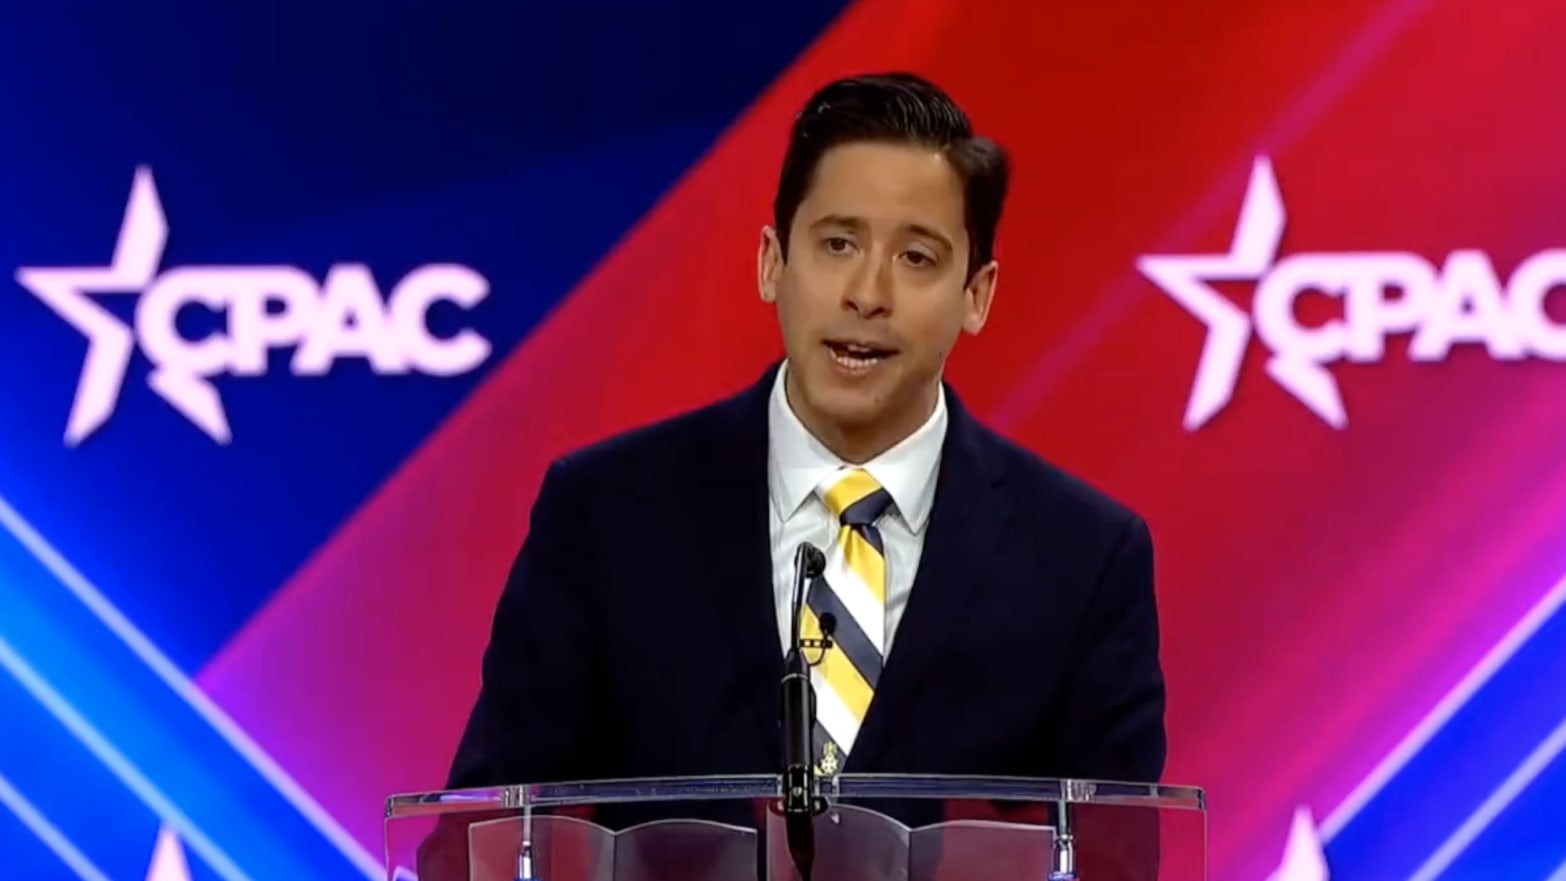 Michael Knowles speaking at CPAC March 4.